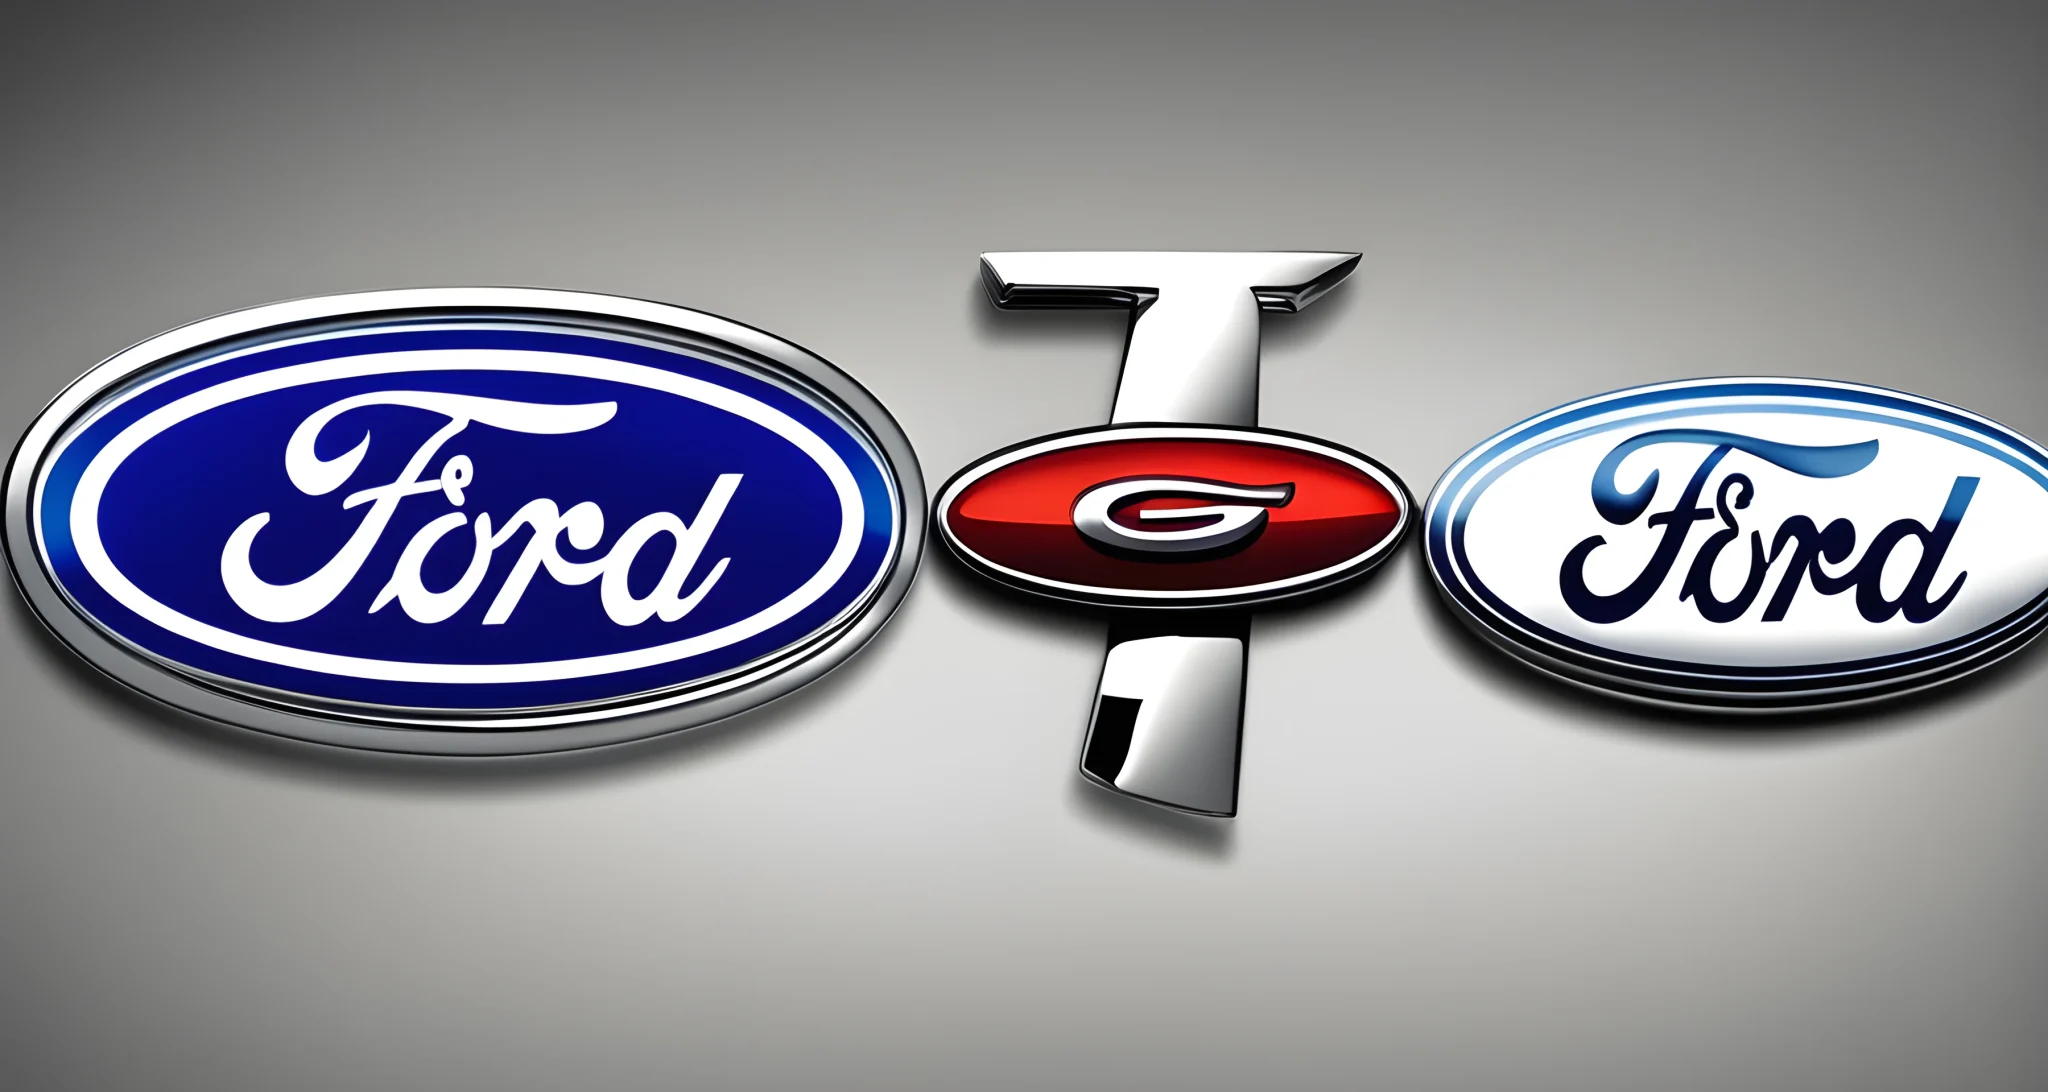 The image shows the logos of General Motors, Ford, and Toyota.